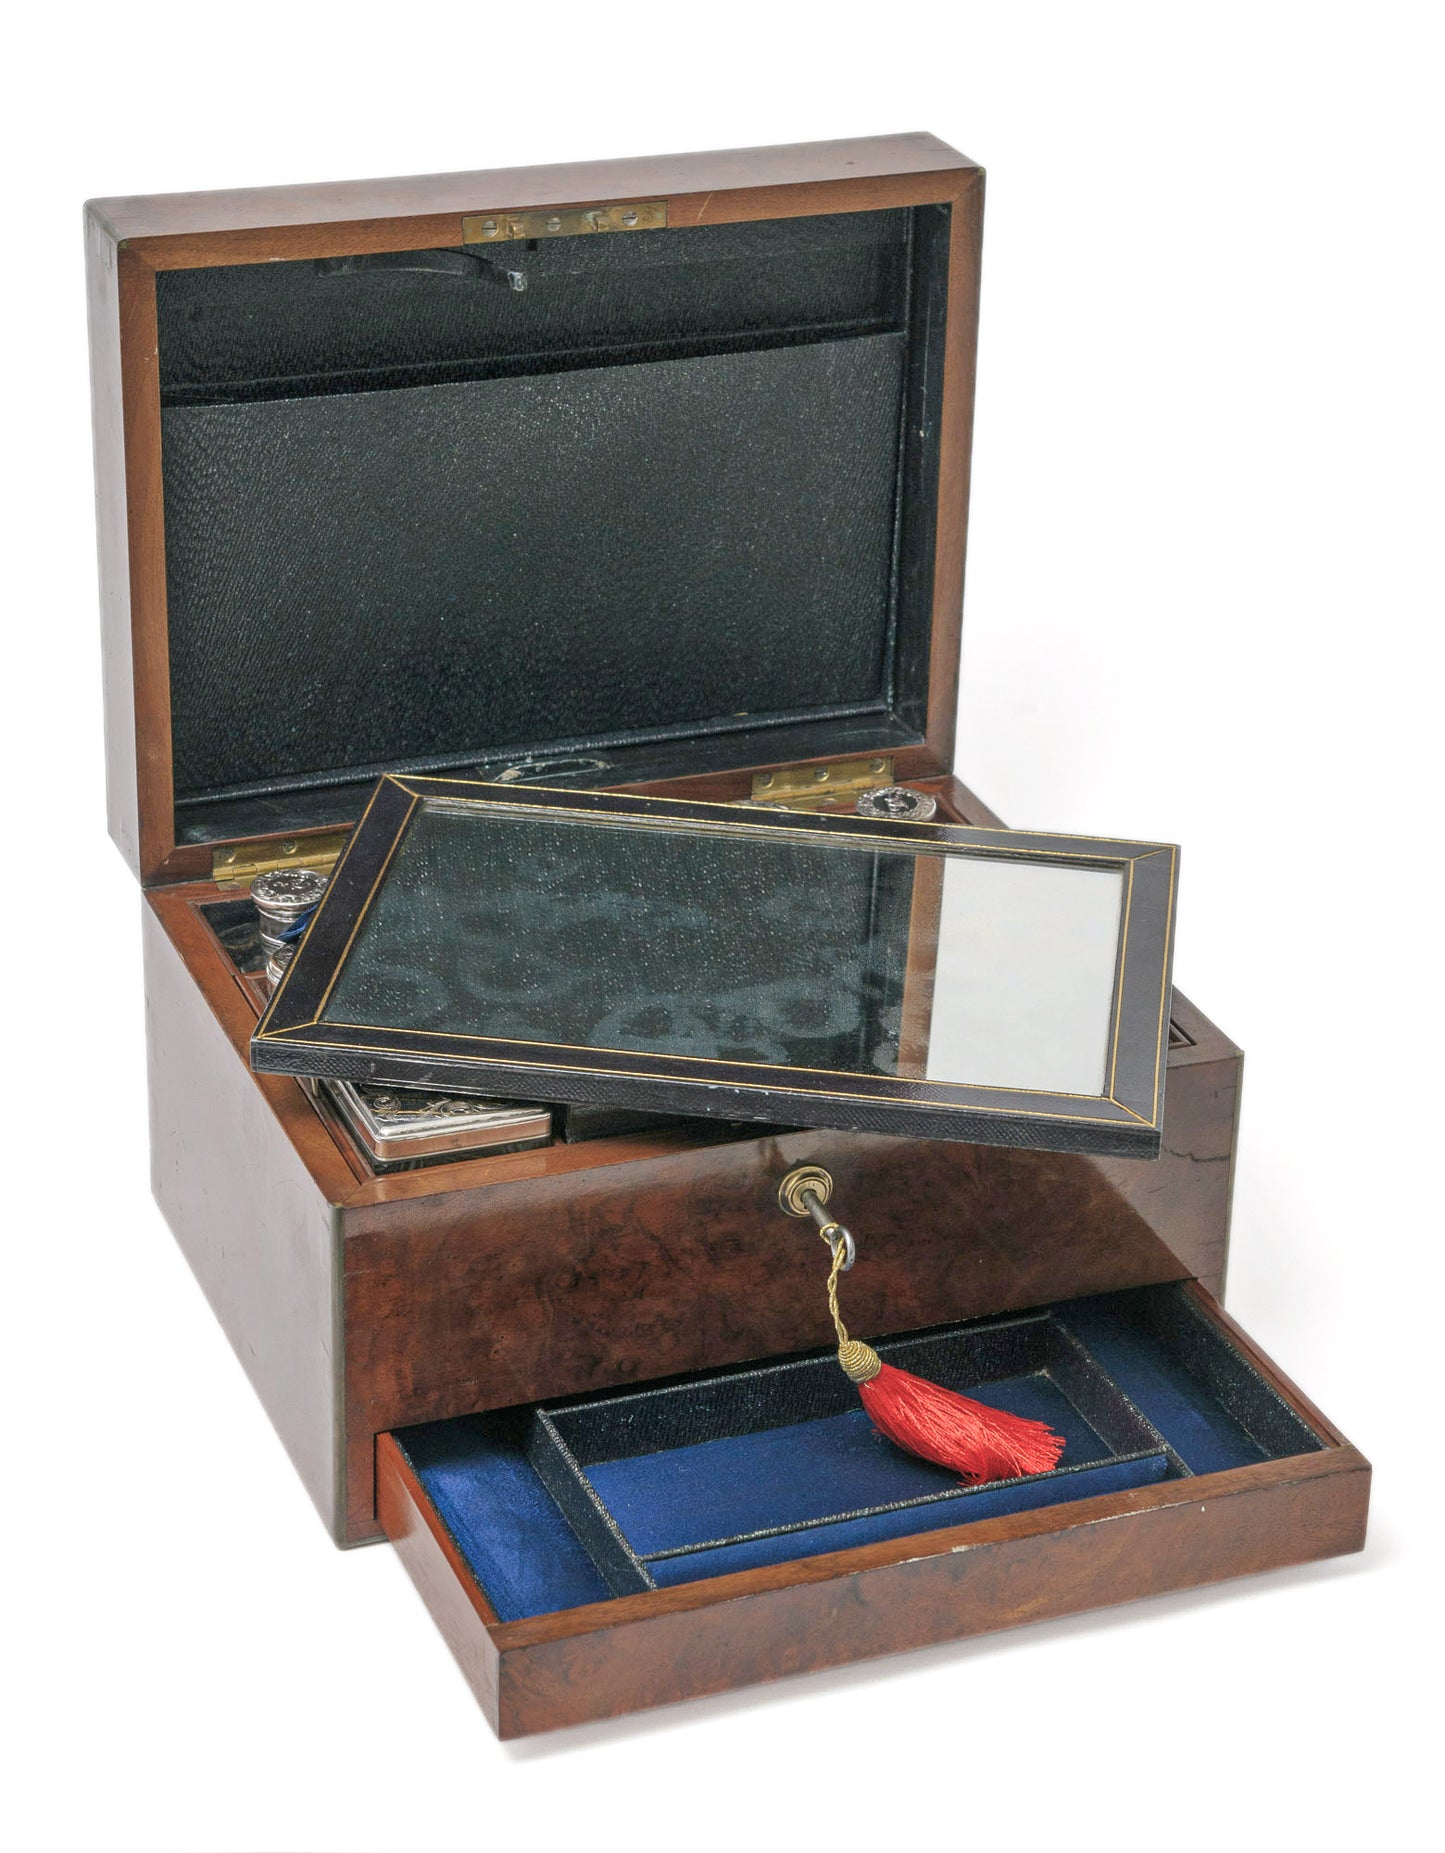 Antique Burr Walnut Dressing Case Box & Silver Plated Fittings by Samuel Fisher of London (Code 1082)